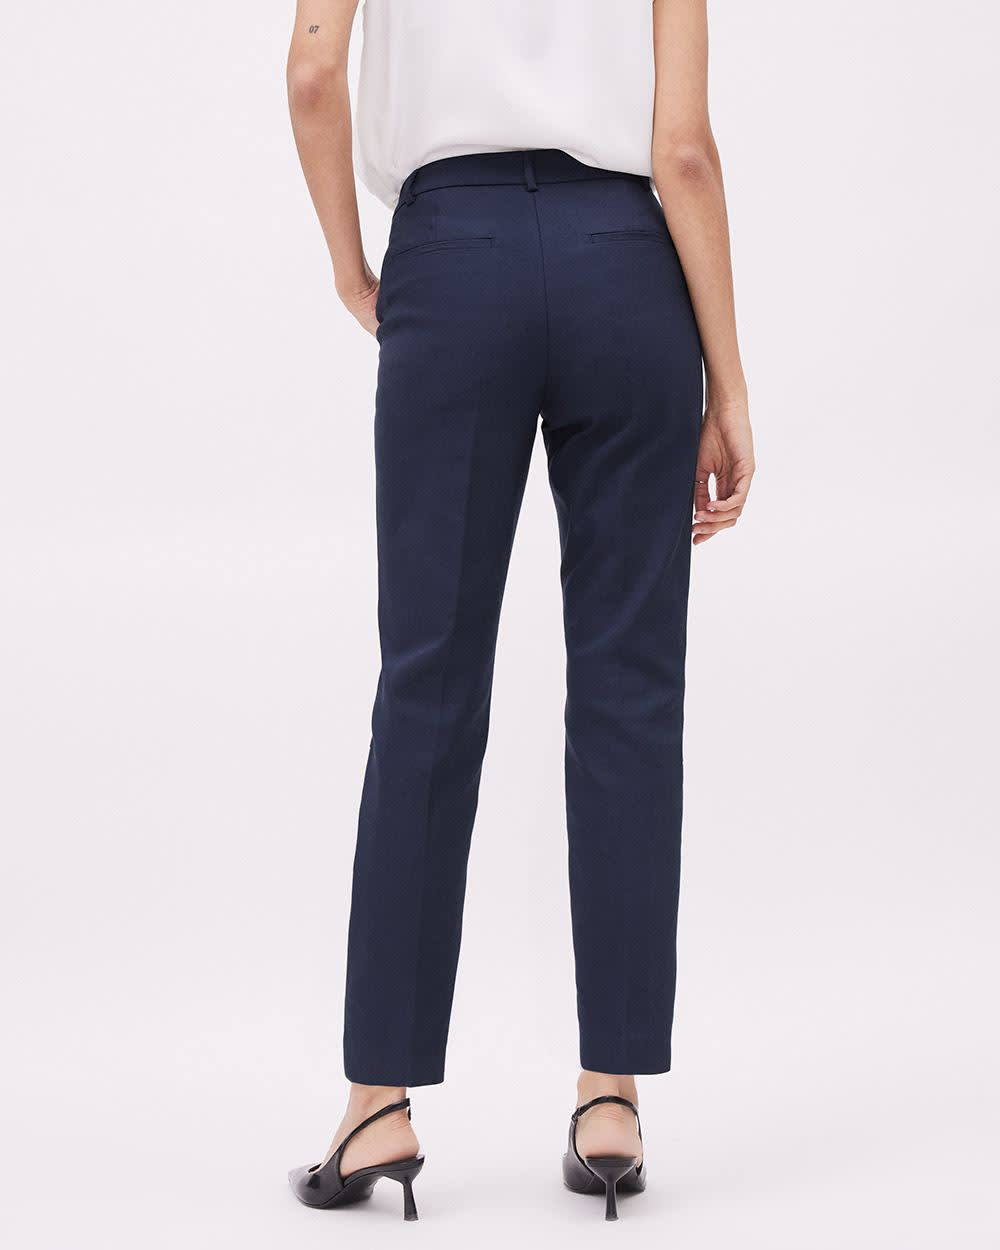 RWHeroes - Slim Fitting Business Casual Pants for Women | RW&CO.